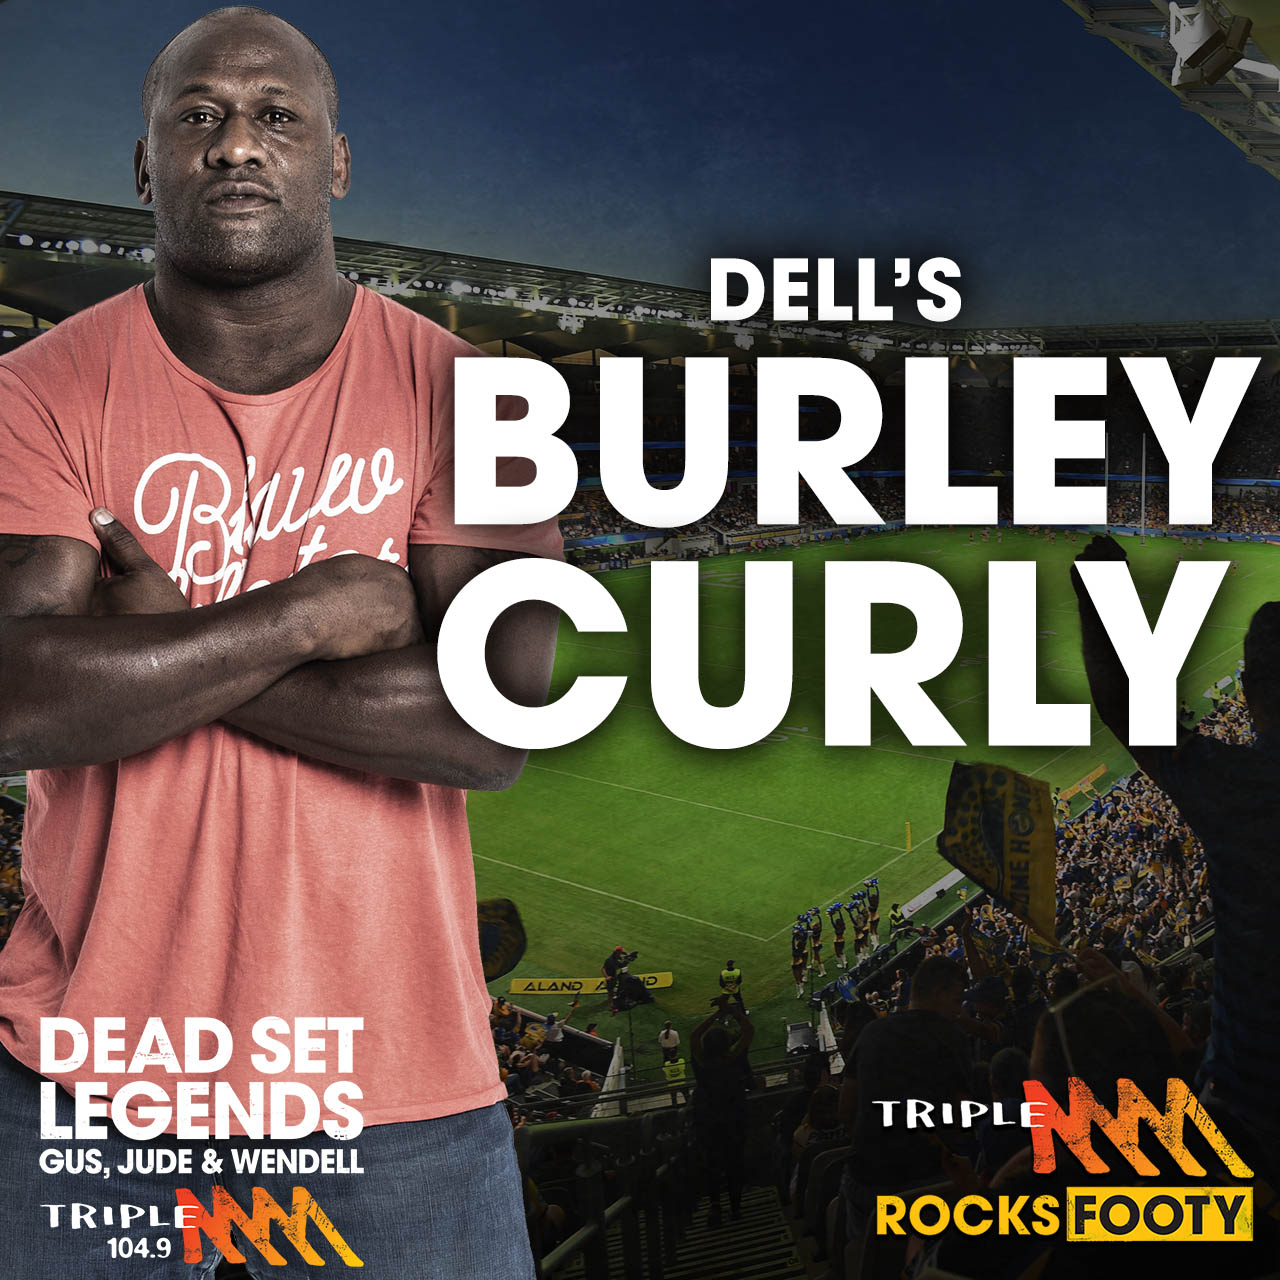 DELL'S BURLEY CURLY | Why Rugby Union Should Be Chasing Angus Crichton + National Anthem Debate